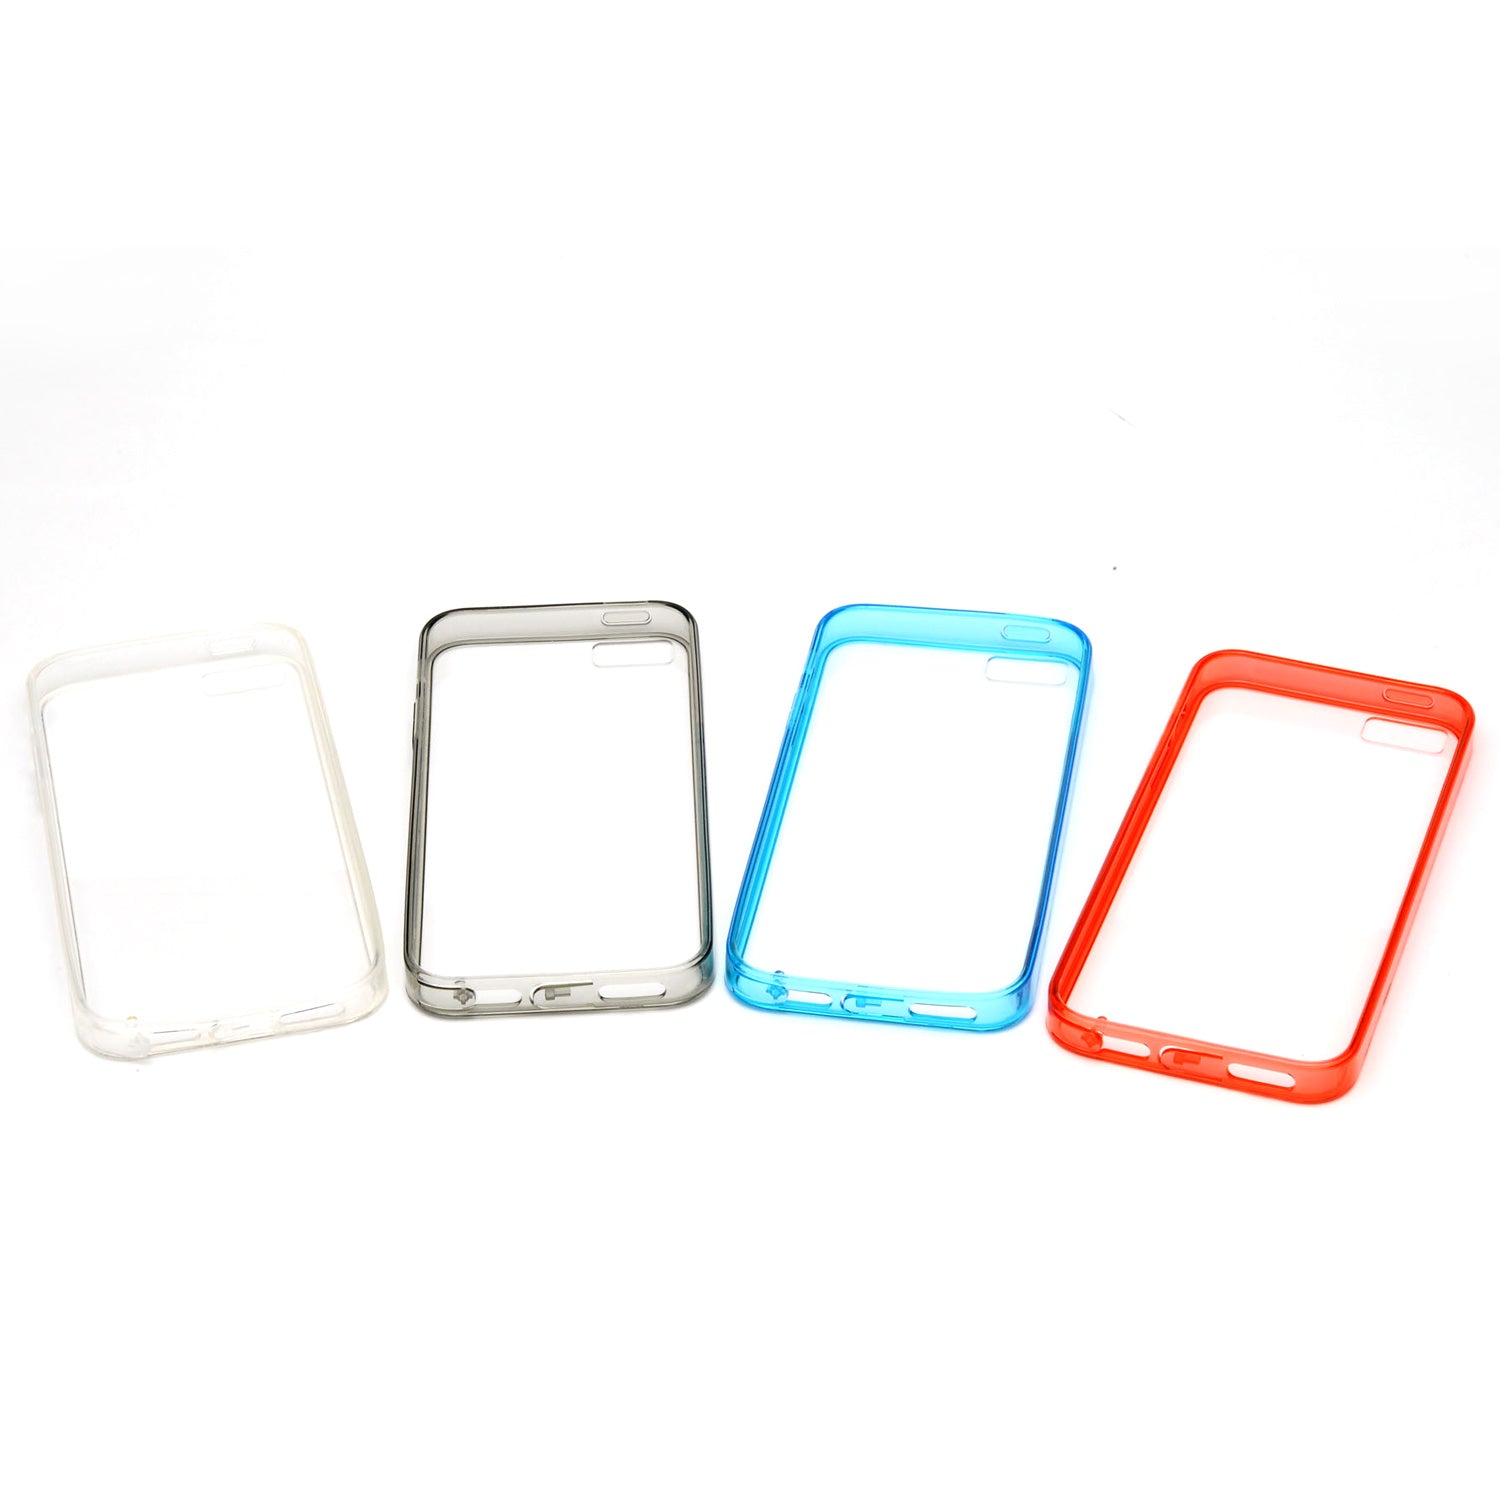 6-MA3510 Case For iPhone 5S